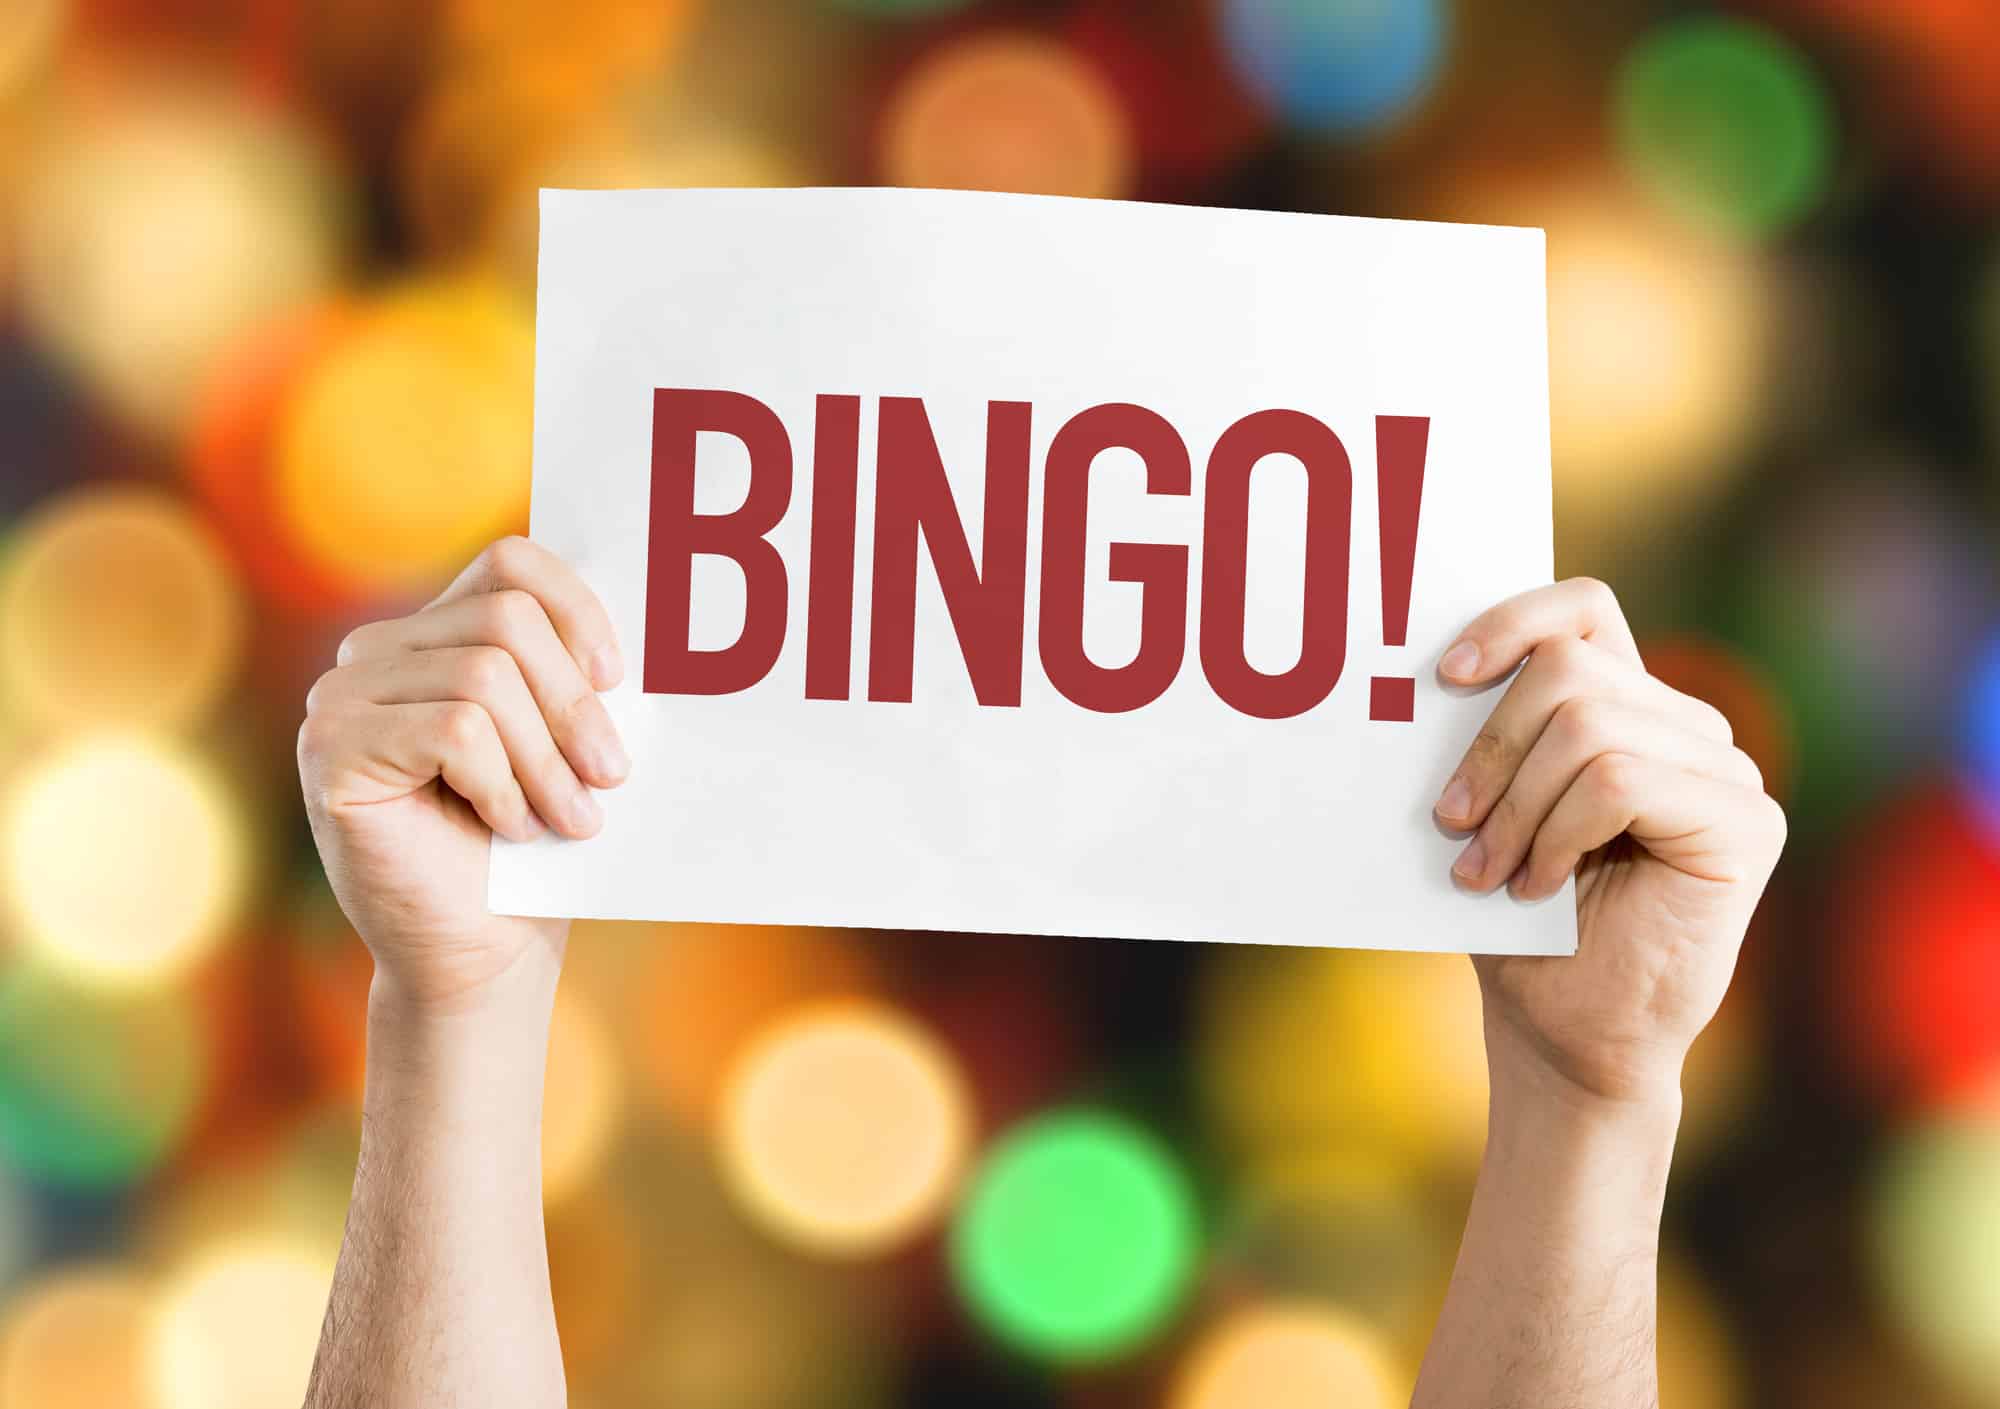 The word BINGO being held up on a card